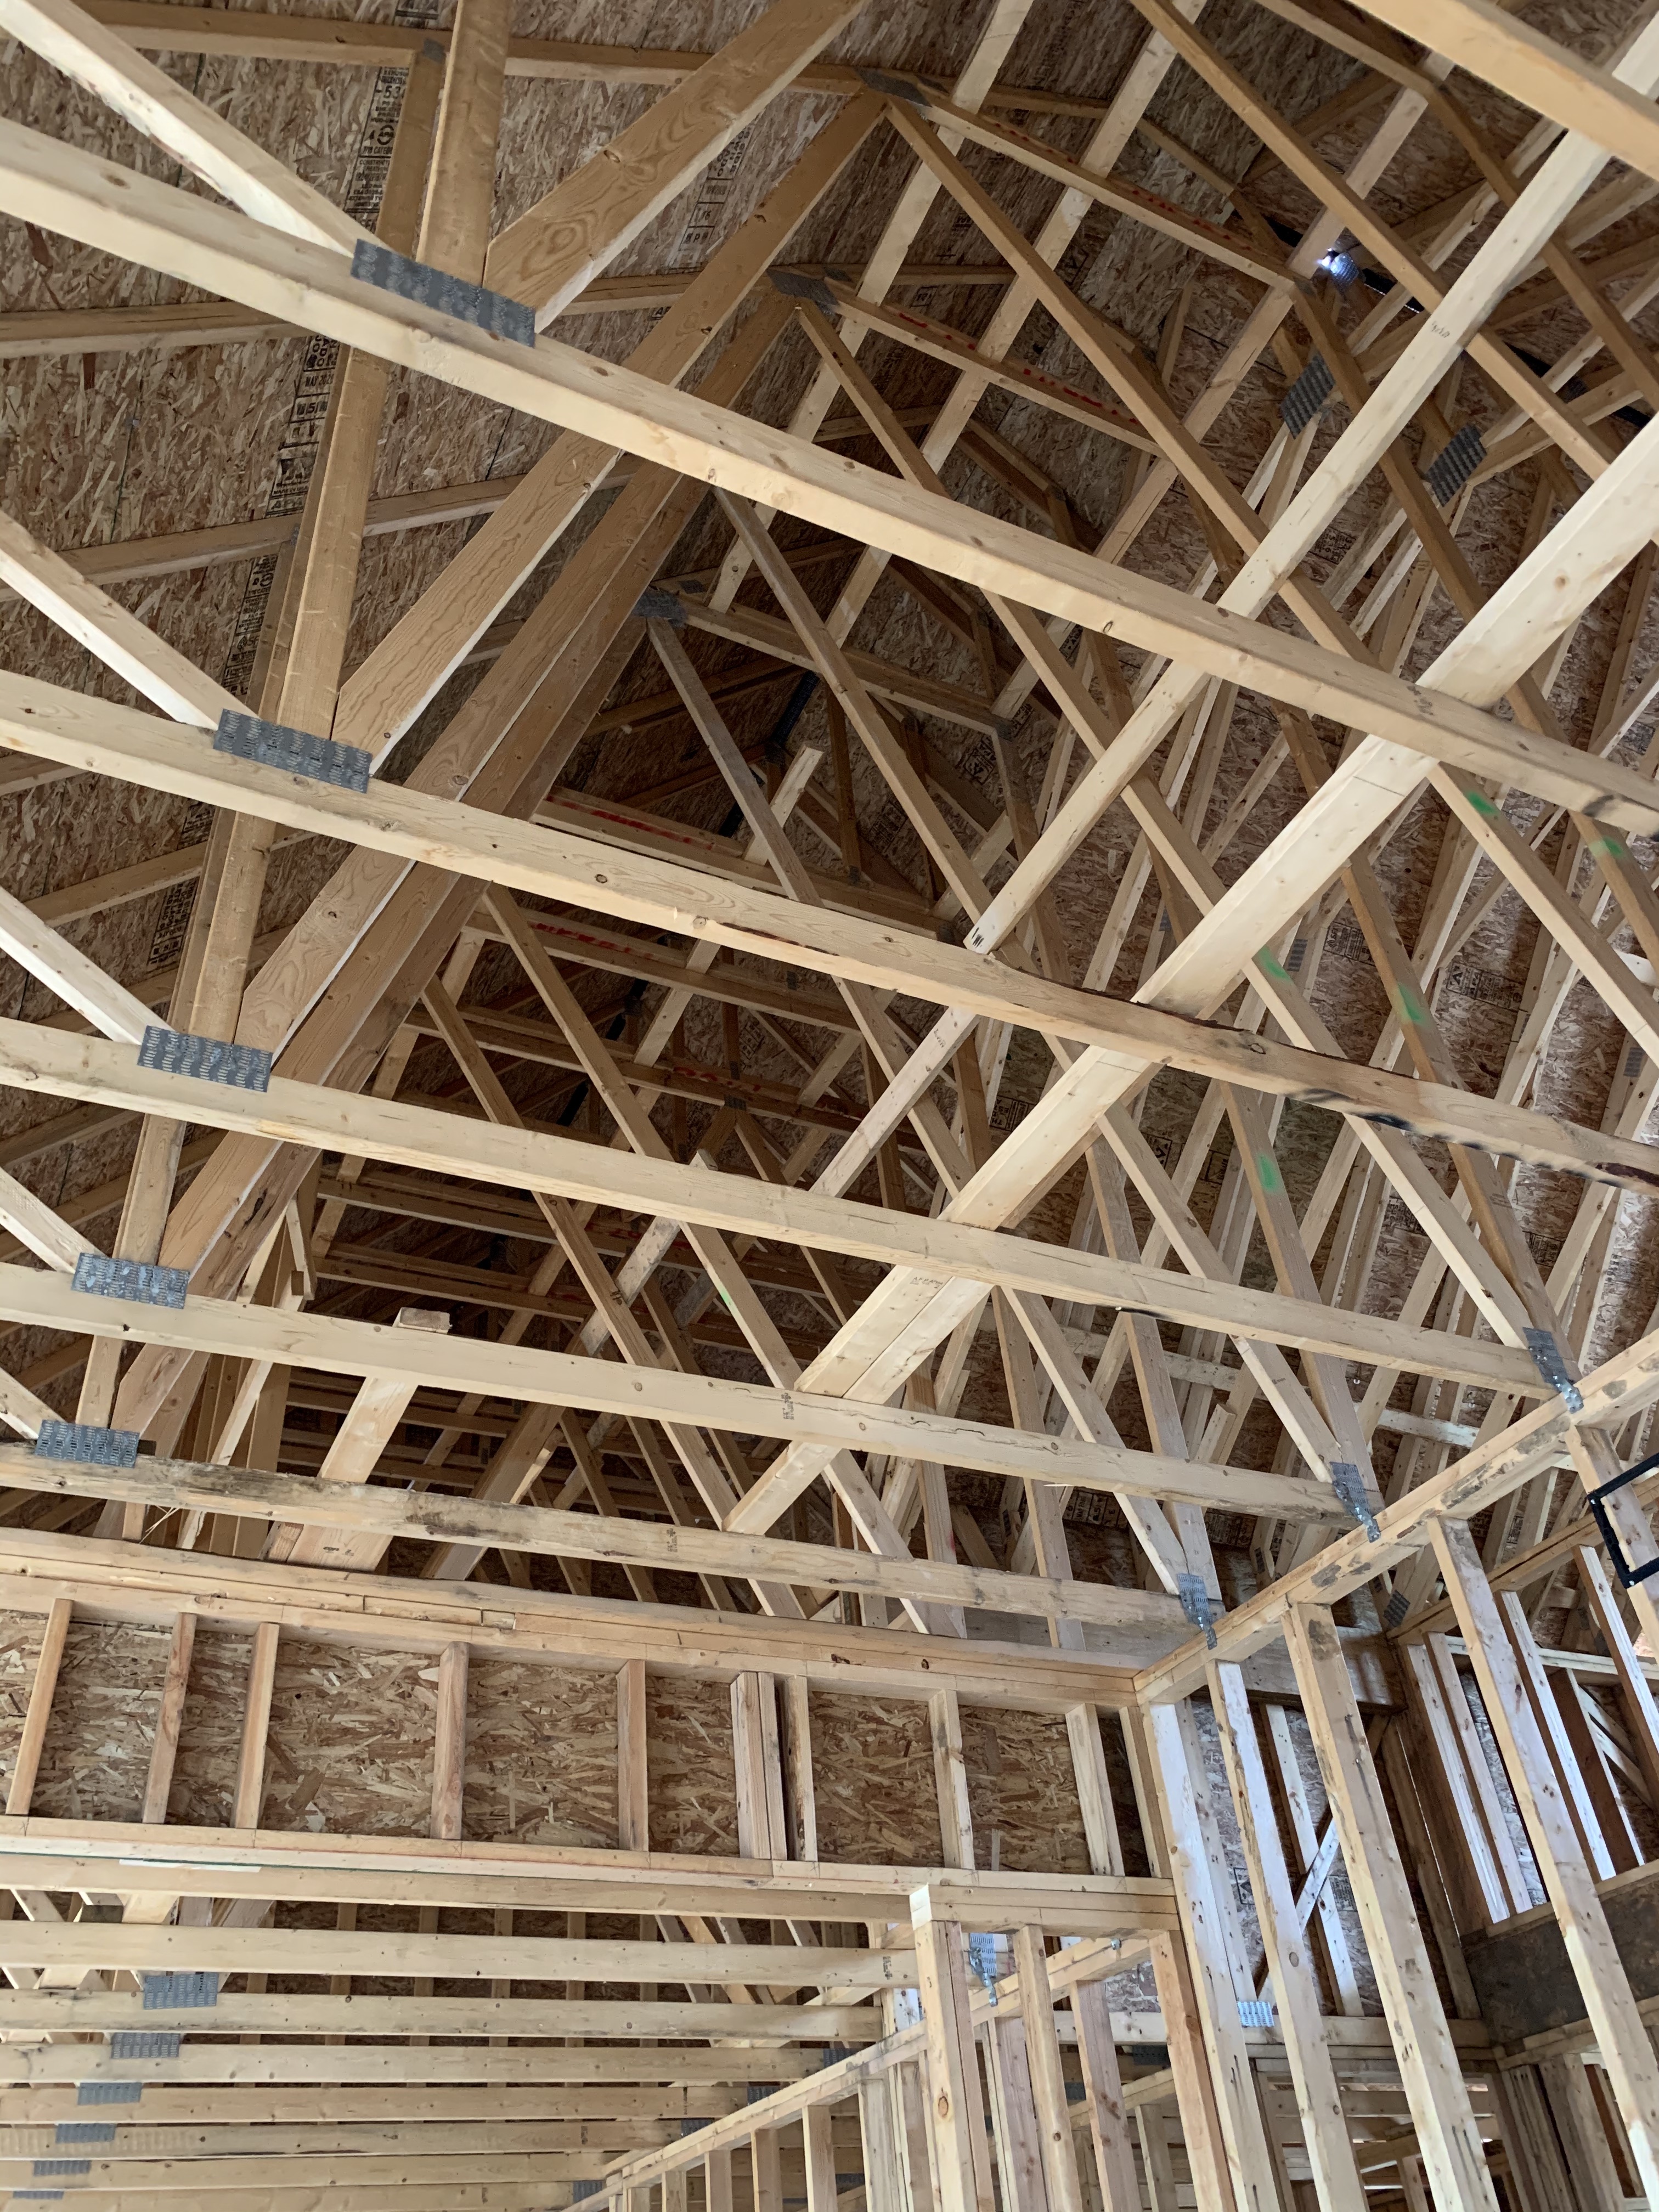 Interior showing roof trusses.